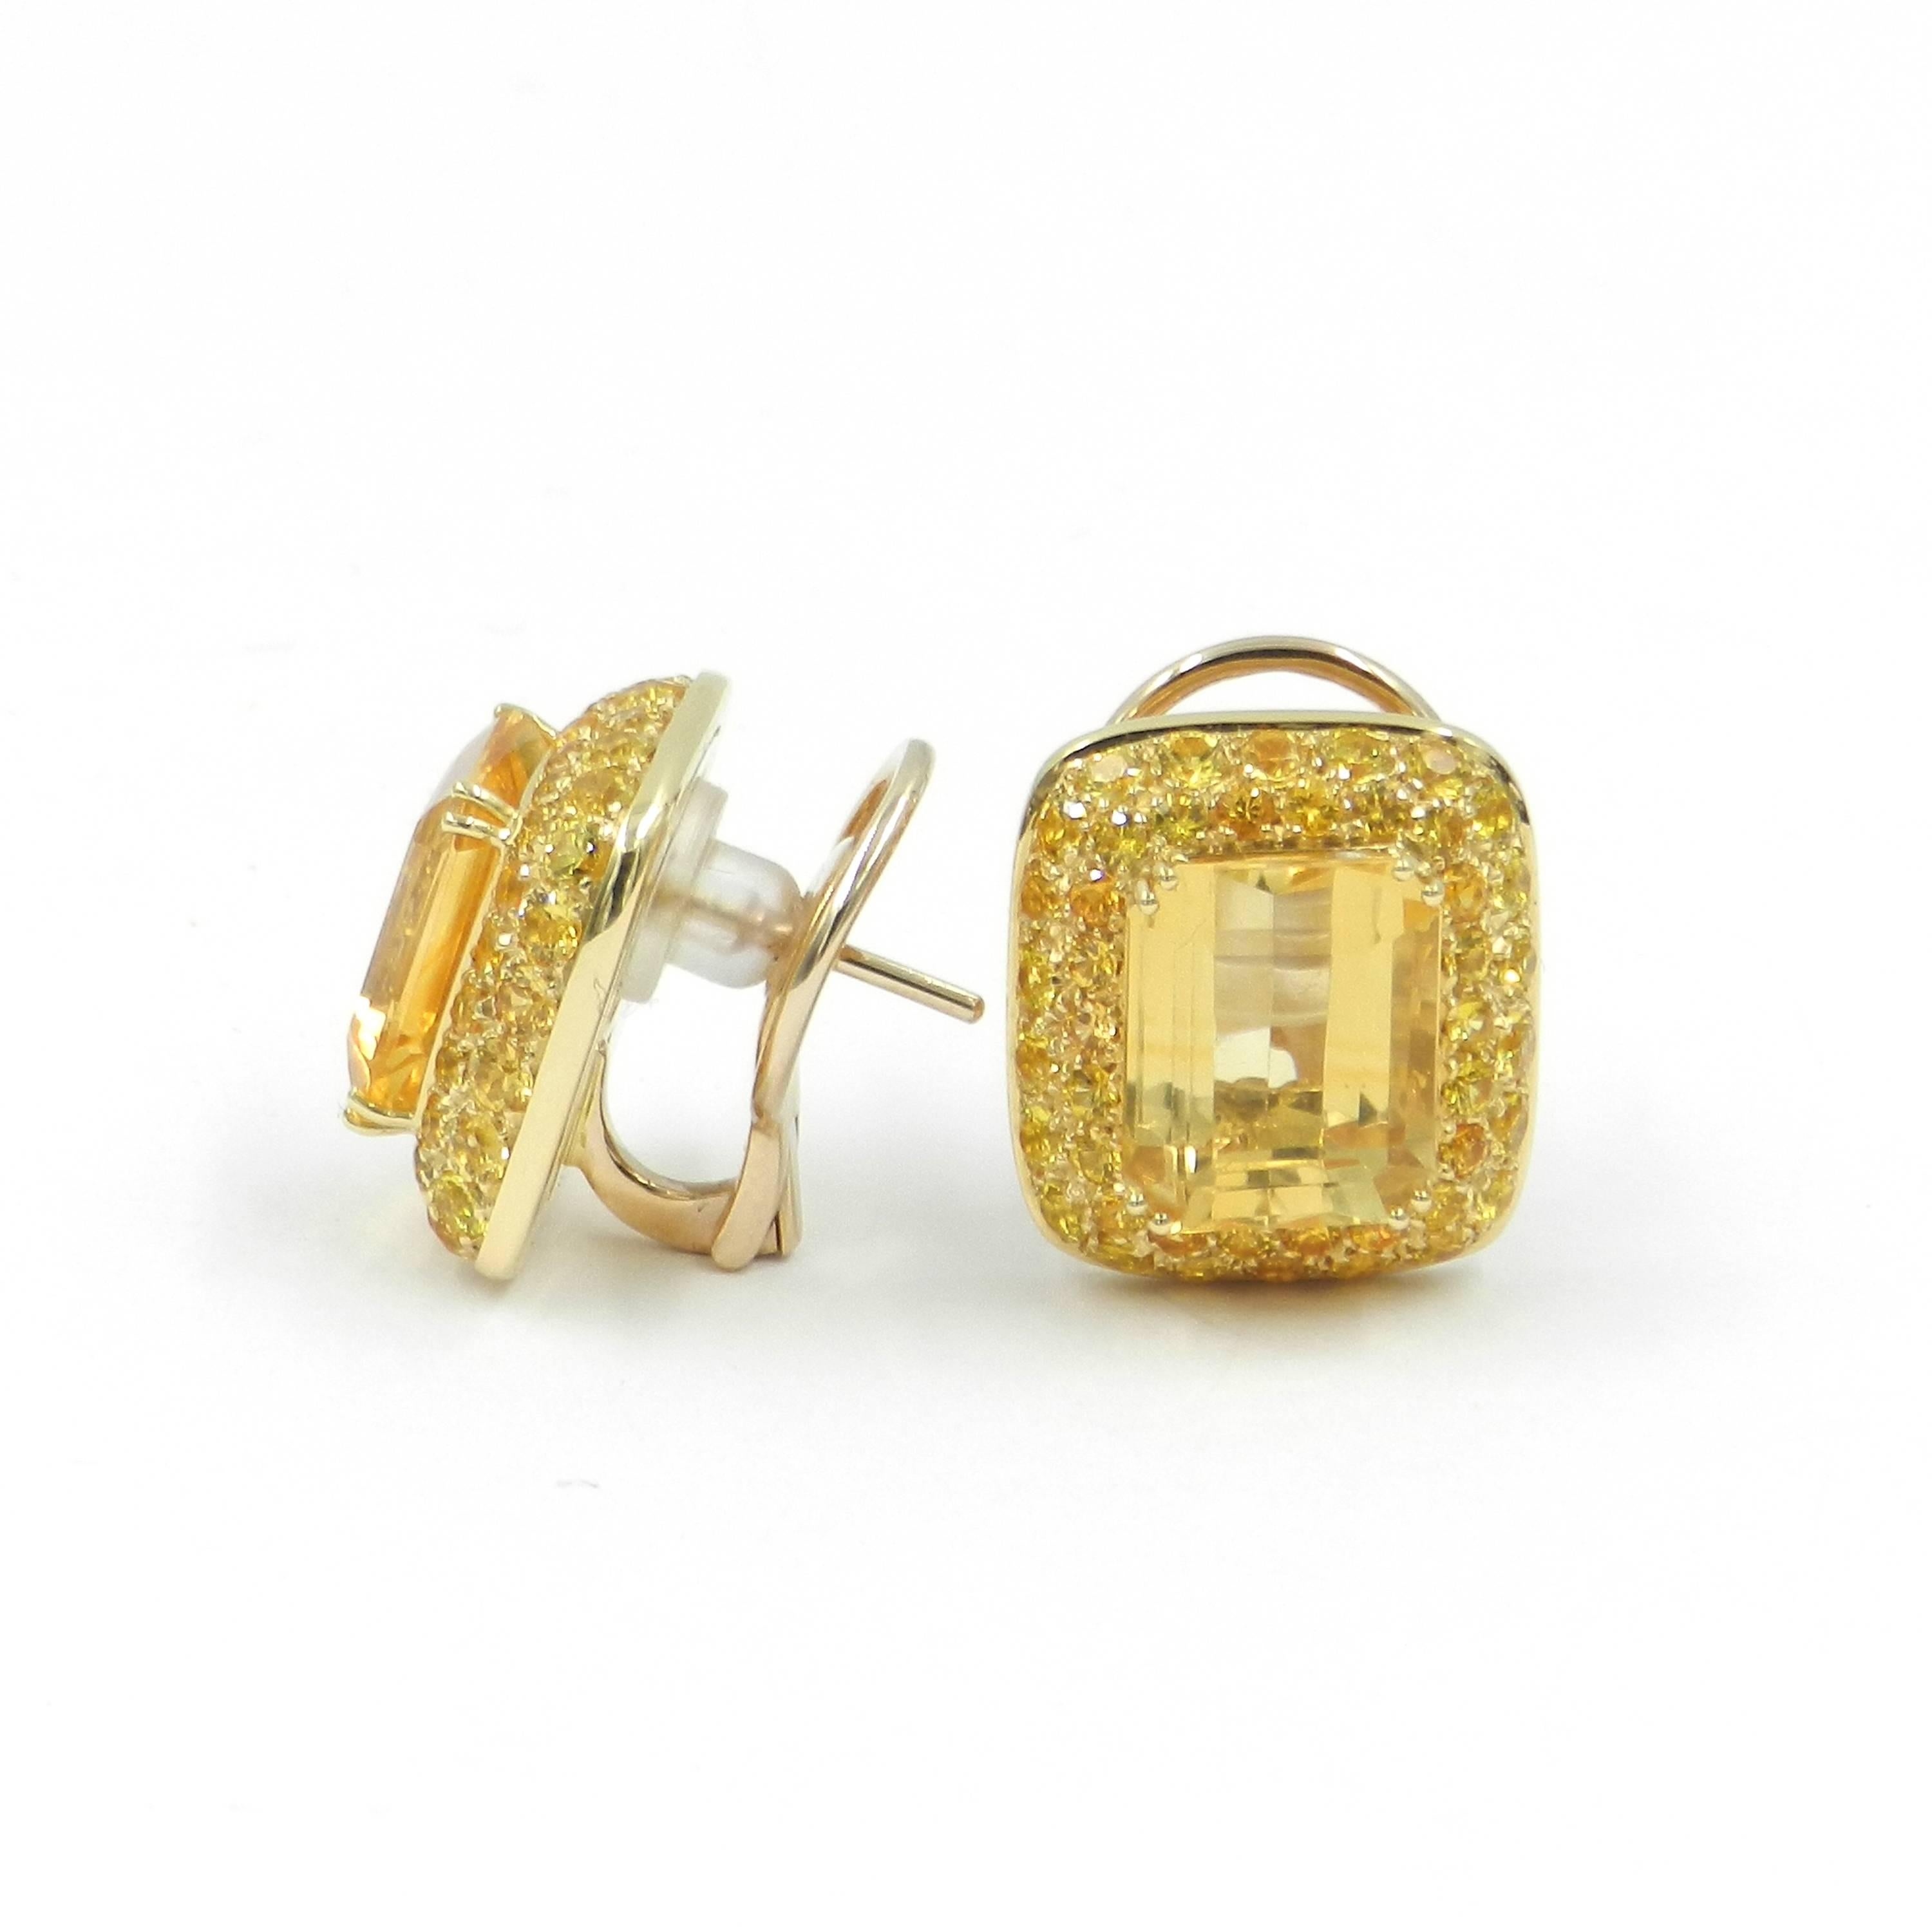 18KT Yellow Gold YELLOW SAPPHIRE and CITRINE GARAVELLI Post and Clip Square EARRINGS
Matching ring available 
18 kt Yellow GOLD gr : 14,80
YELLOW SAPPHIRES  ct: 4,56
CITRINE ct : 11,52